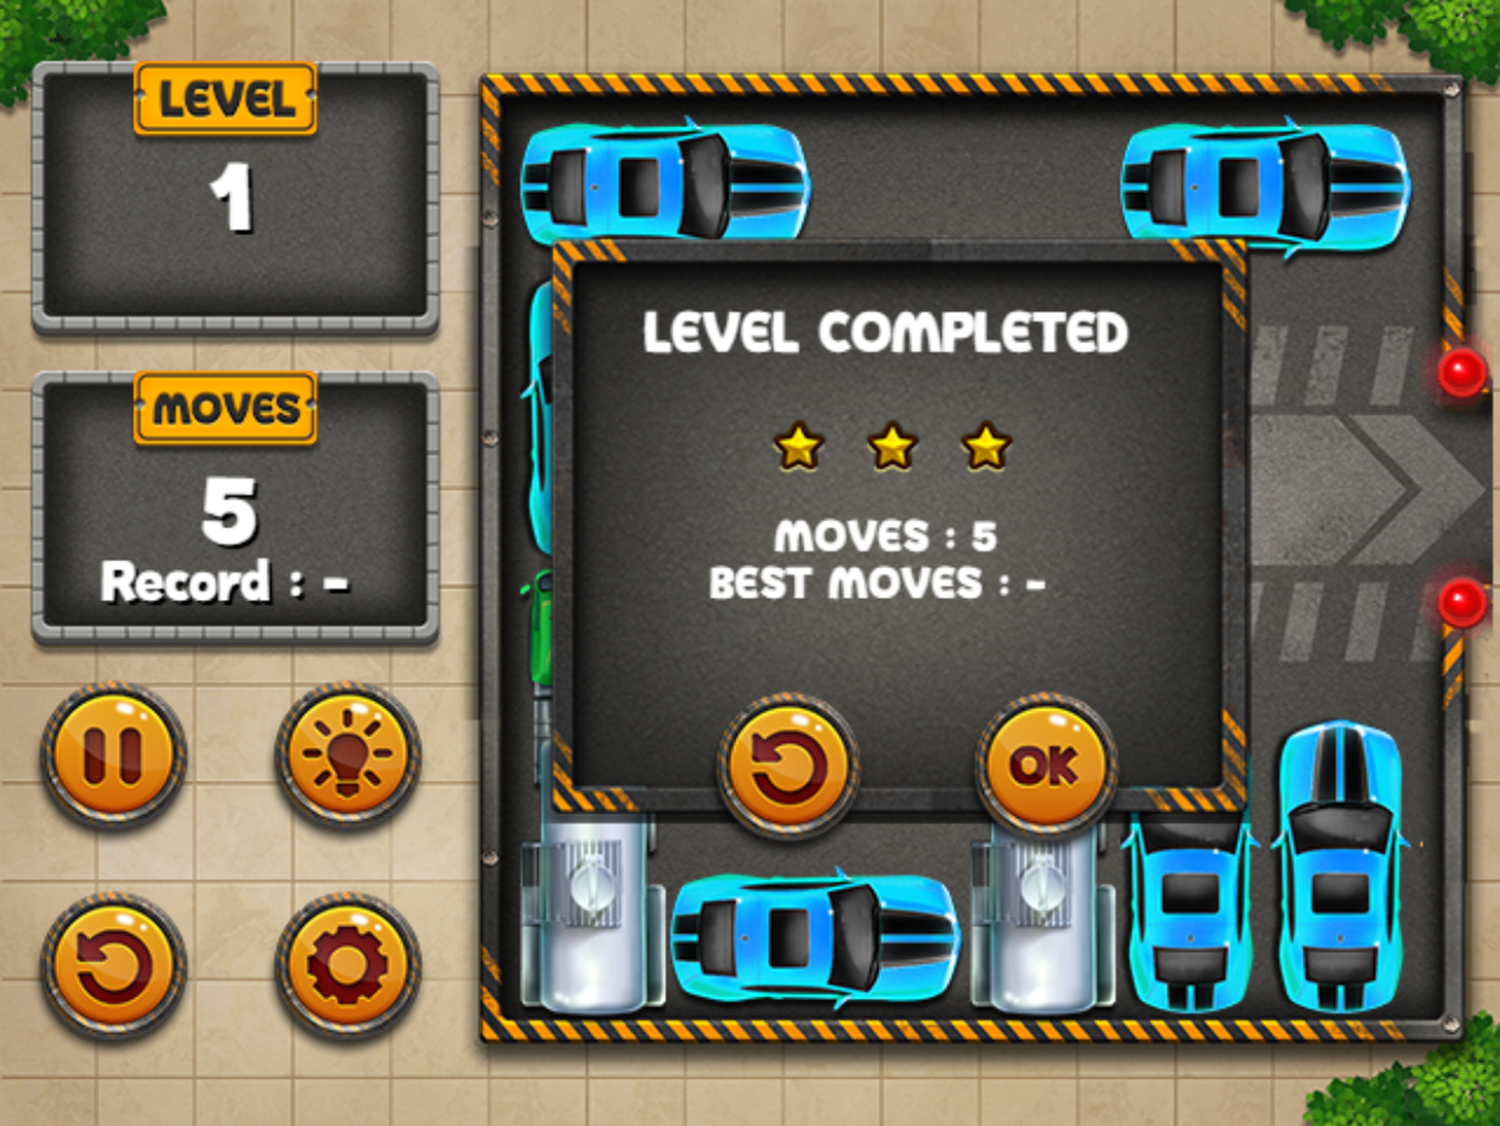 Car Park Puzzle Game Level Completed Screen Screenshot.